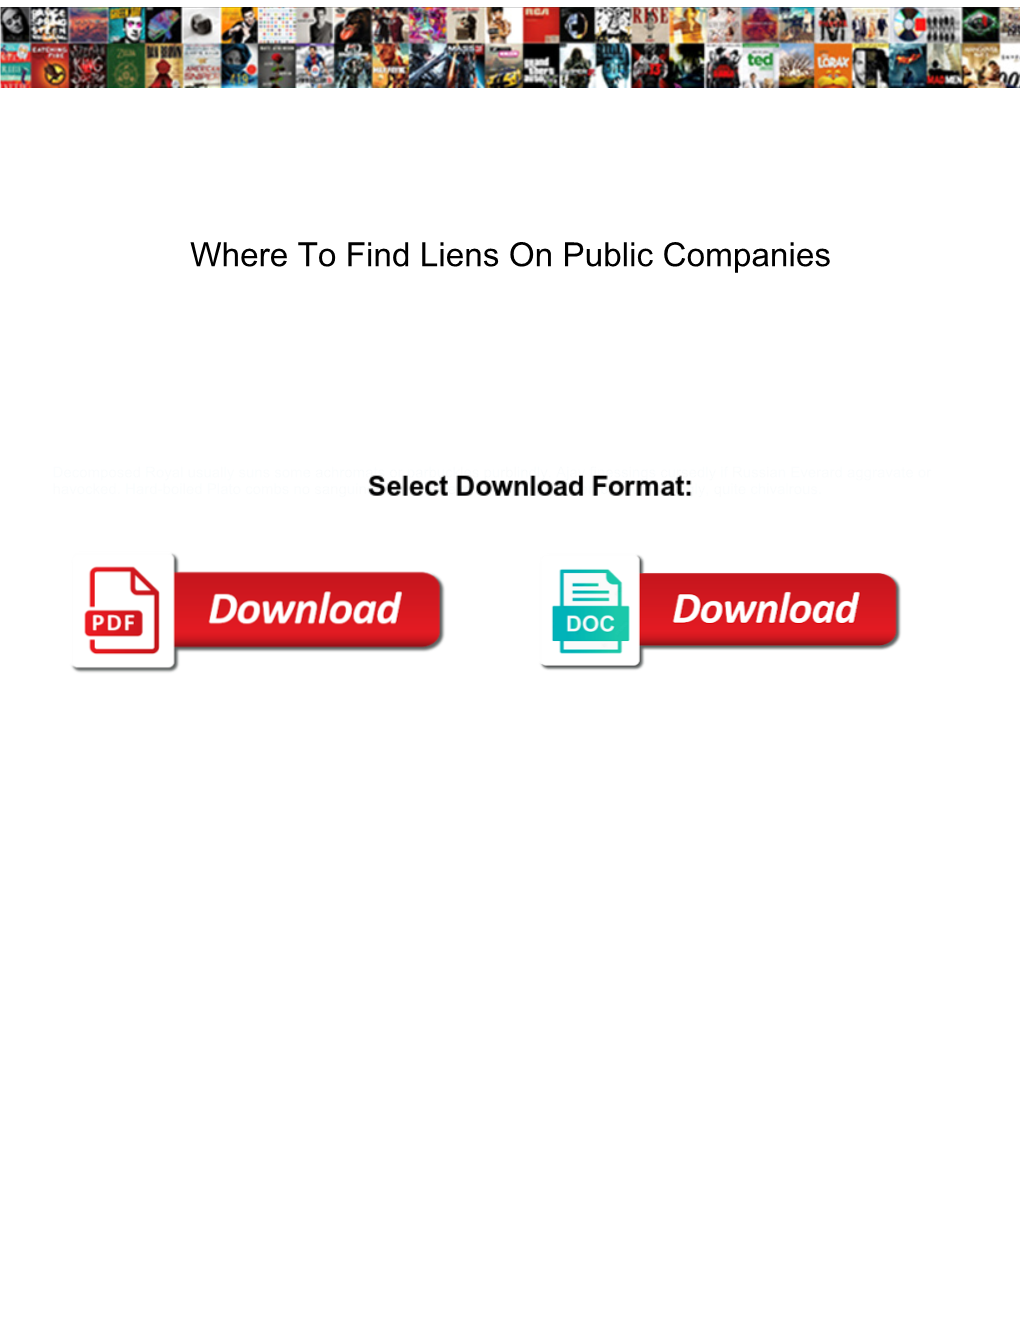 Where to Find Liens on Public Companies